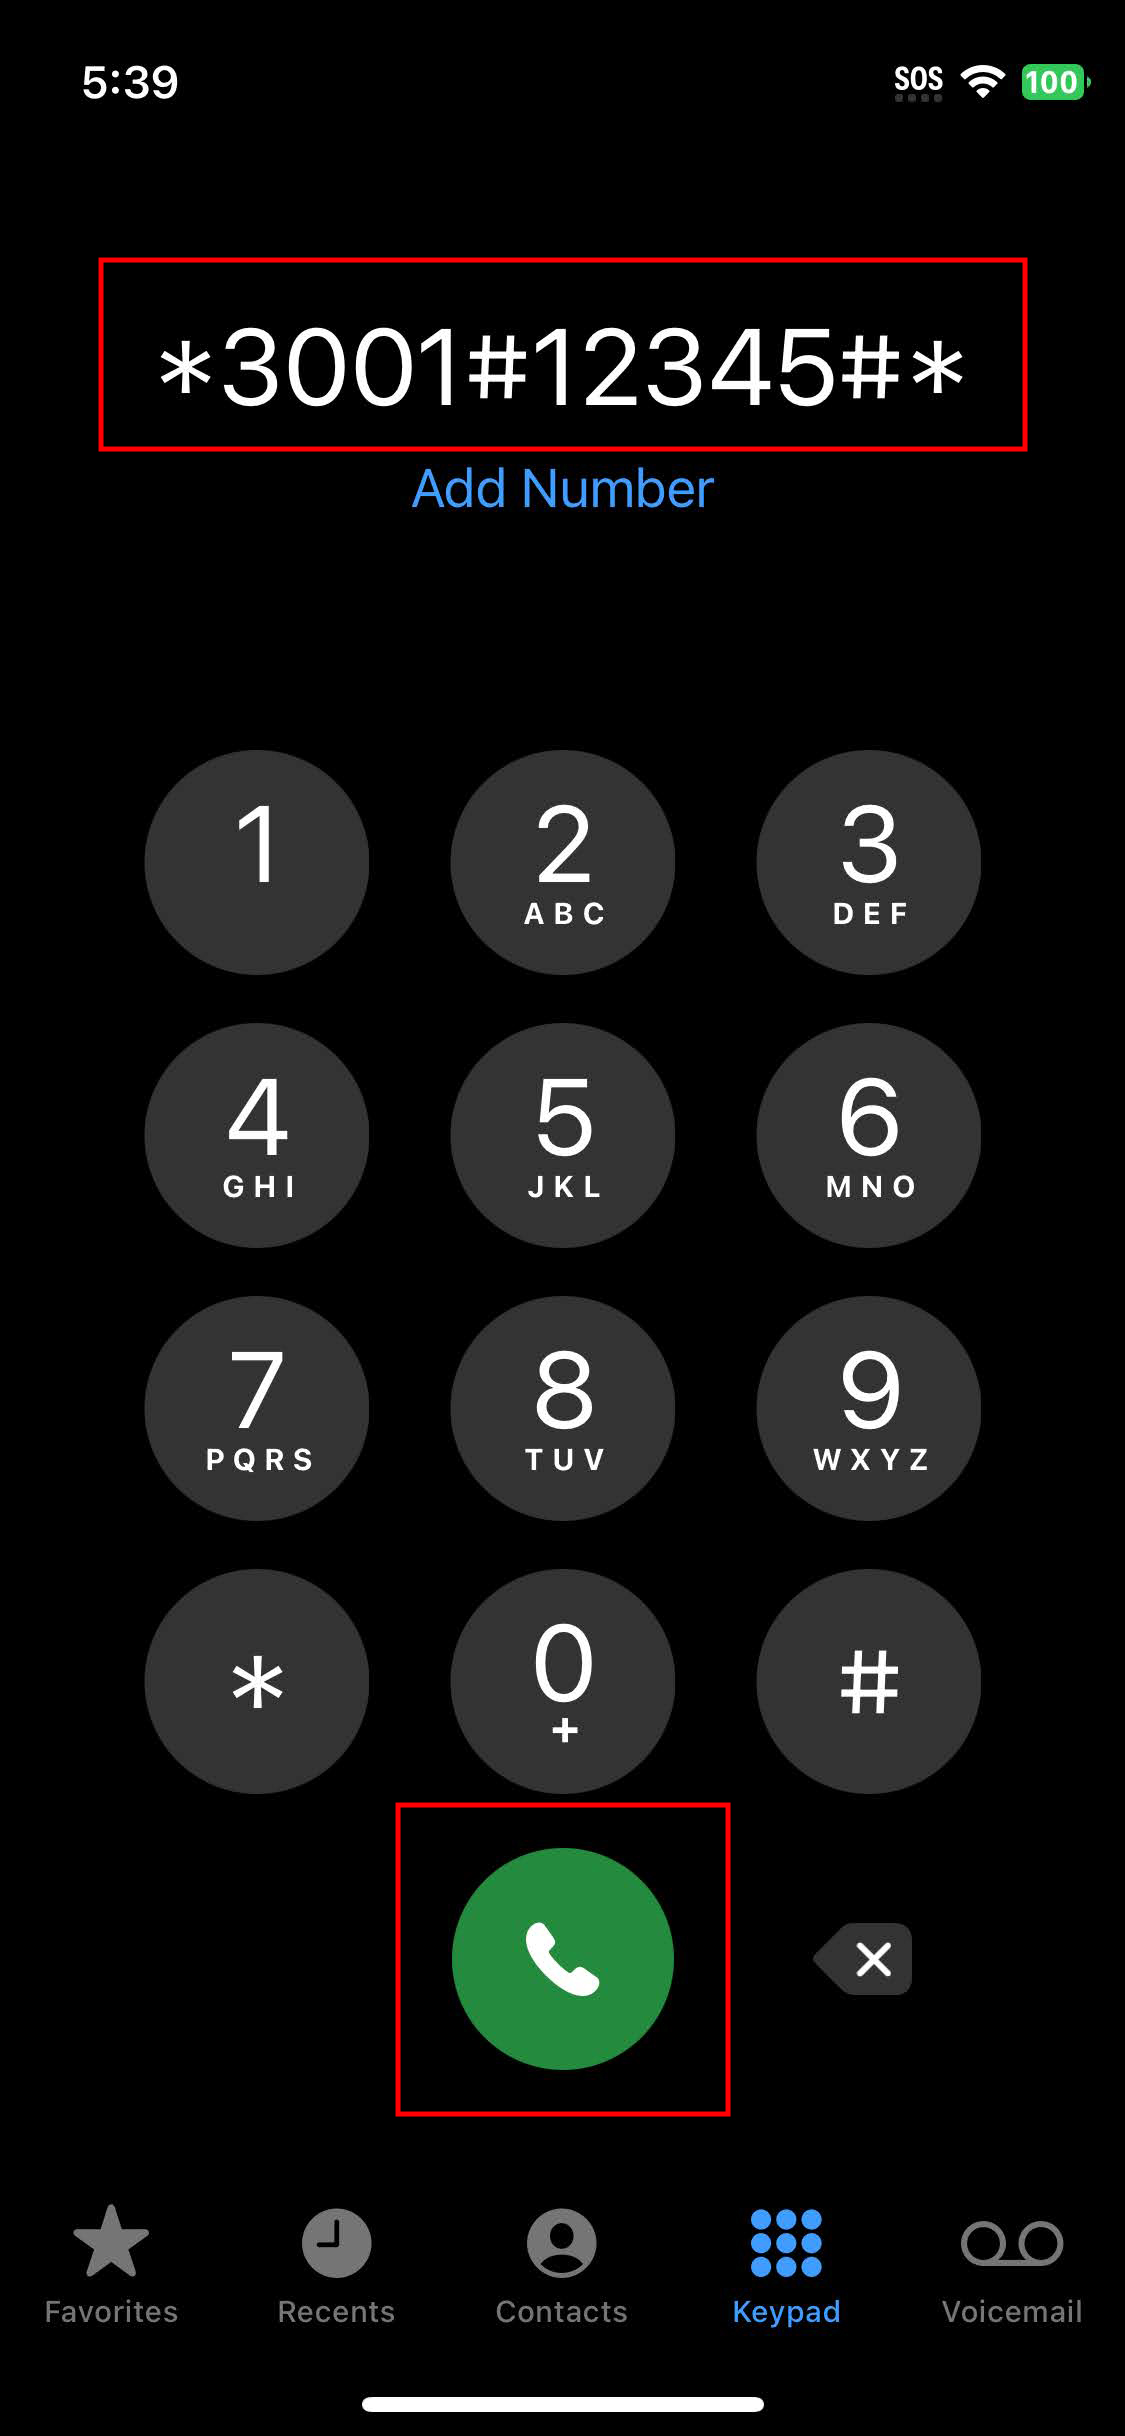 How to use iPhone secret codes (2)